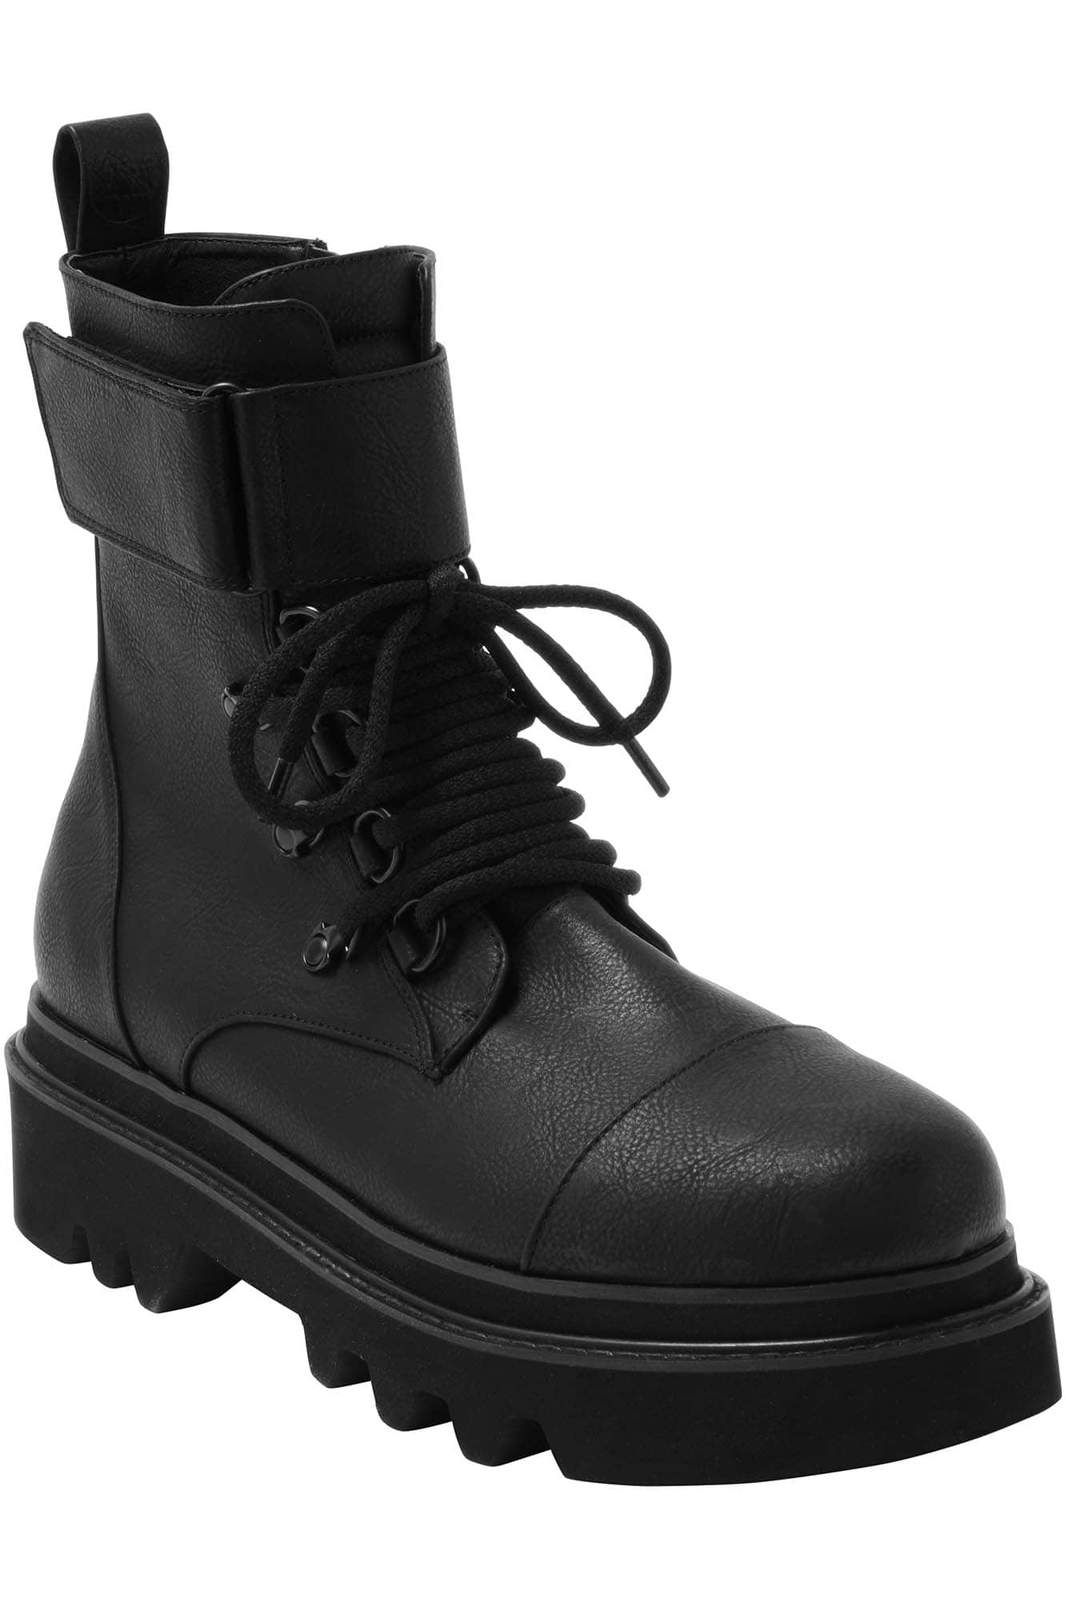 Add army boots to footwear to look
stylish